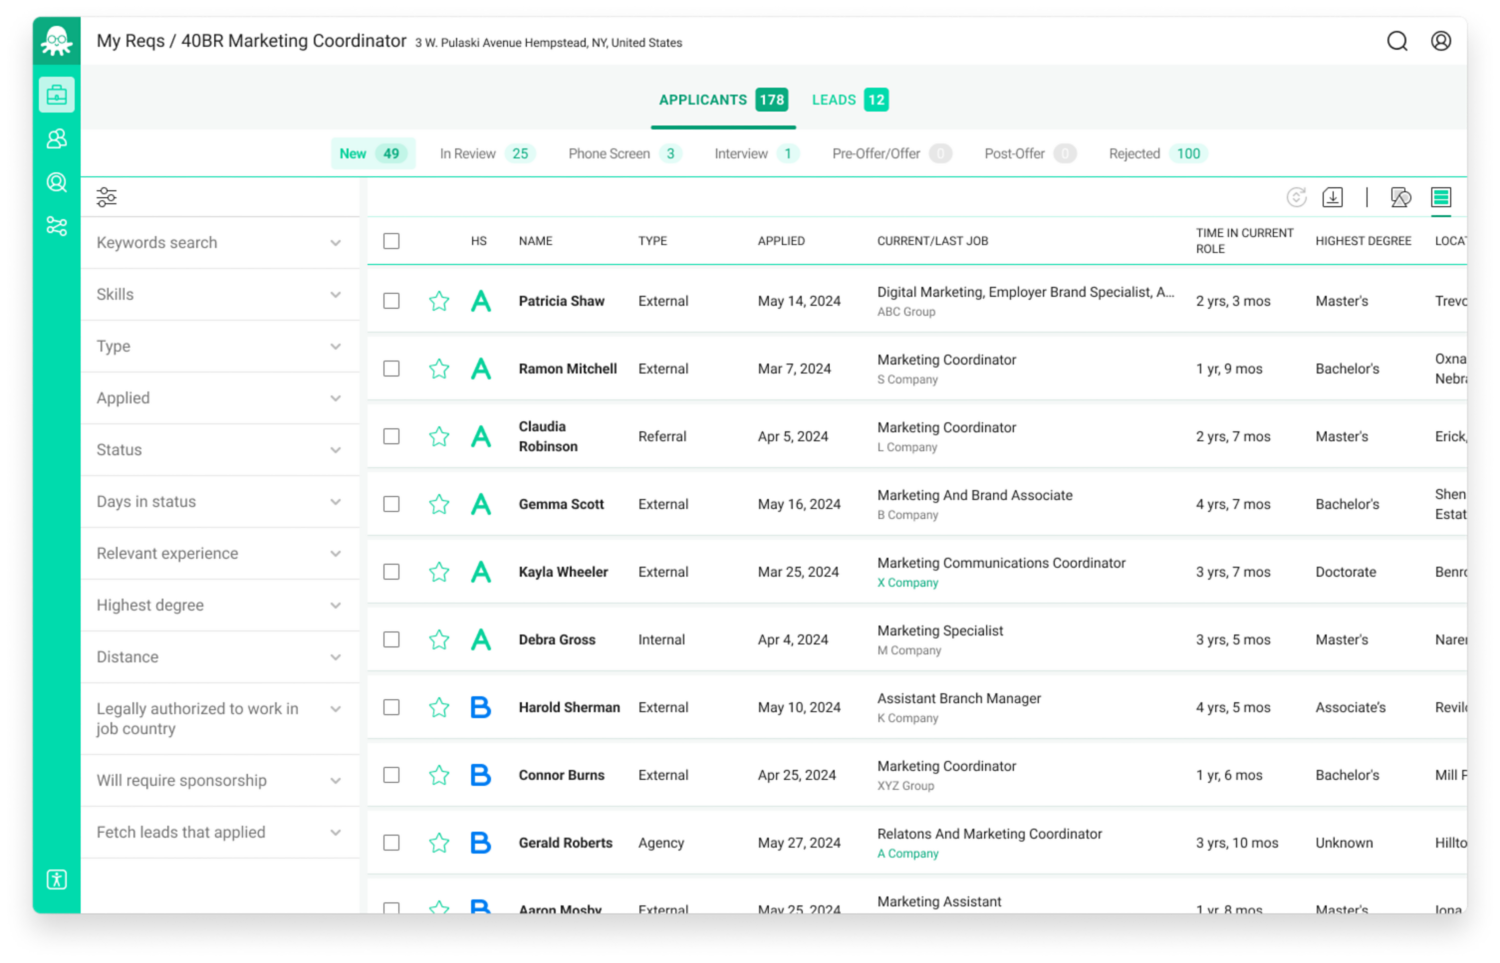 HiredScore AI for Recruiting’s Spotlight inbox identifies top talent fairly and efficiently through unbiased, AI-driven candidate grading.